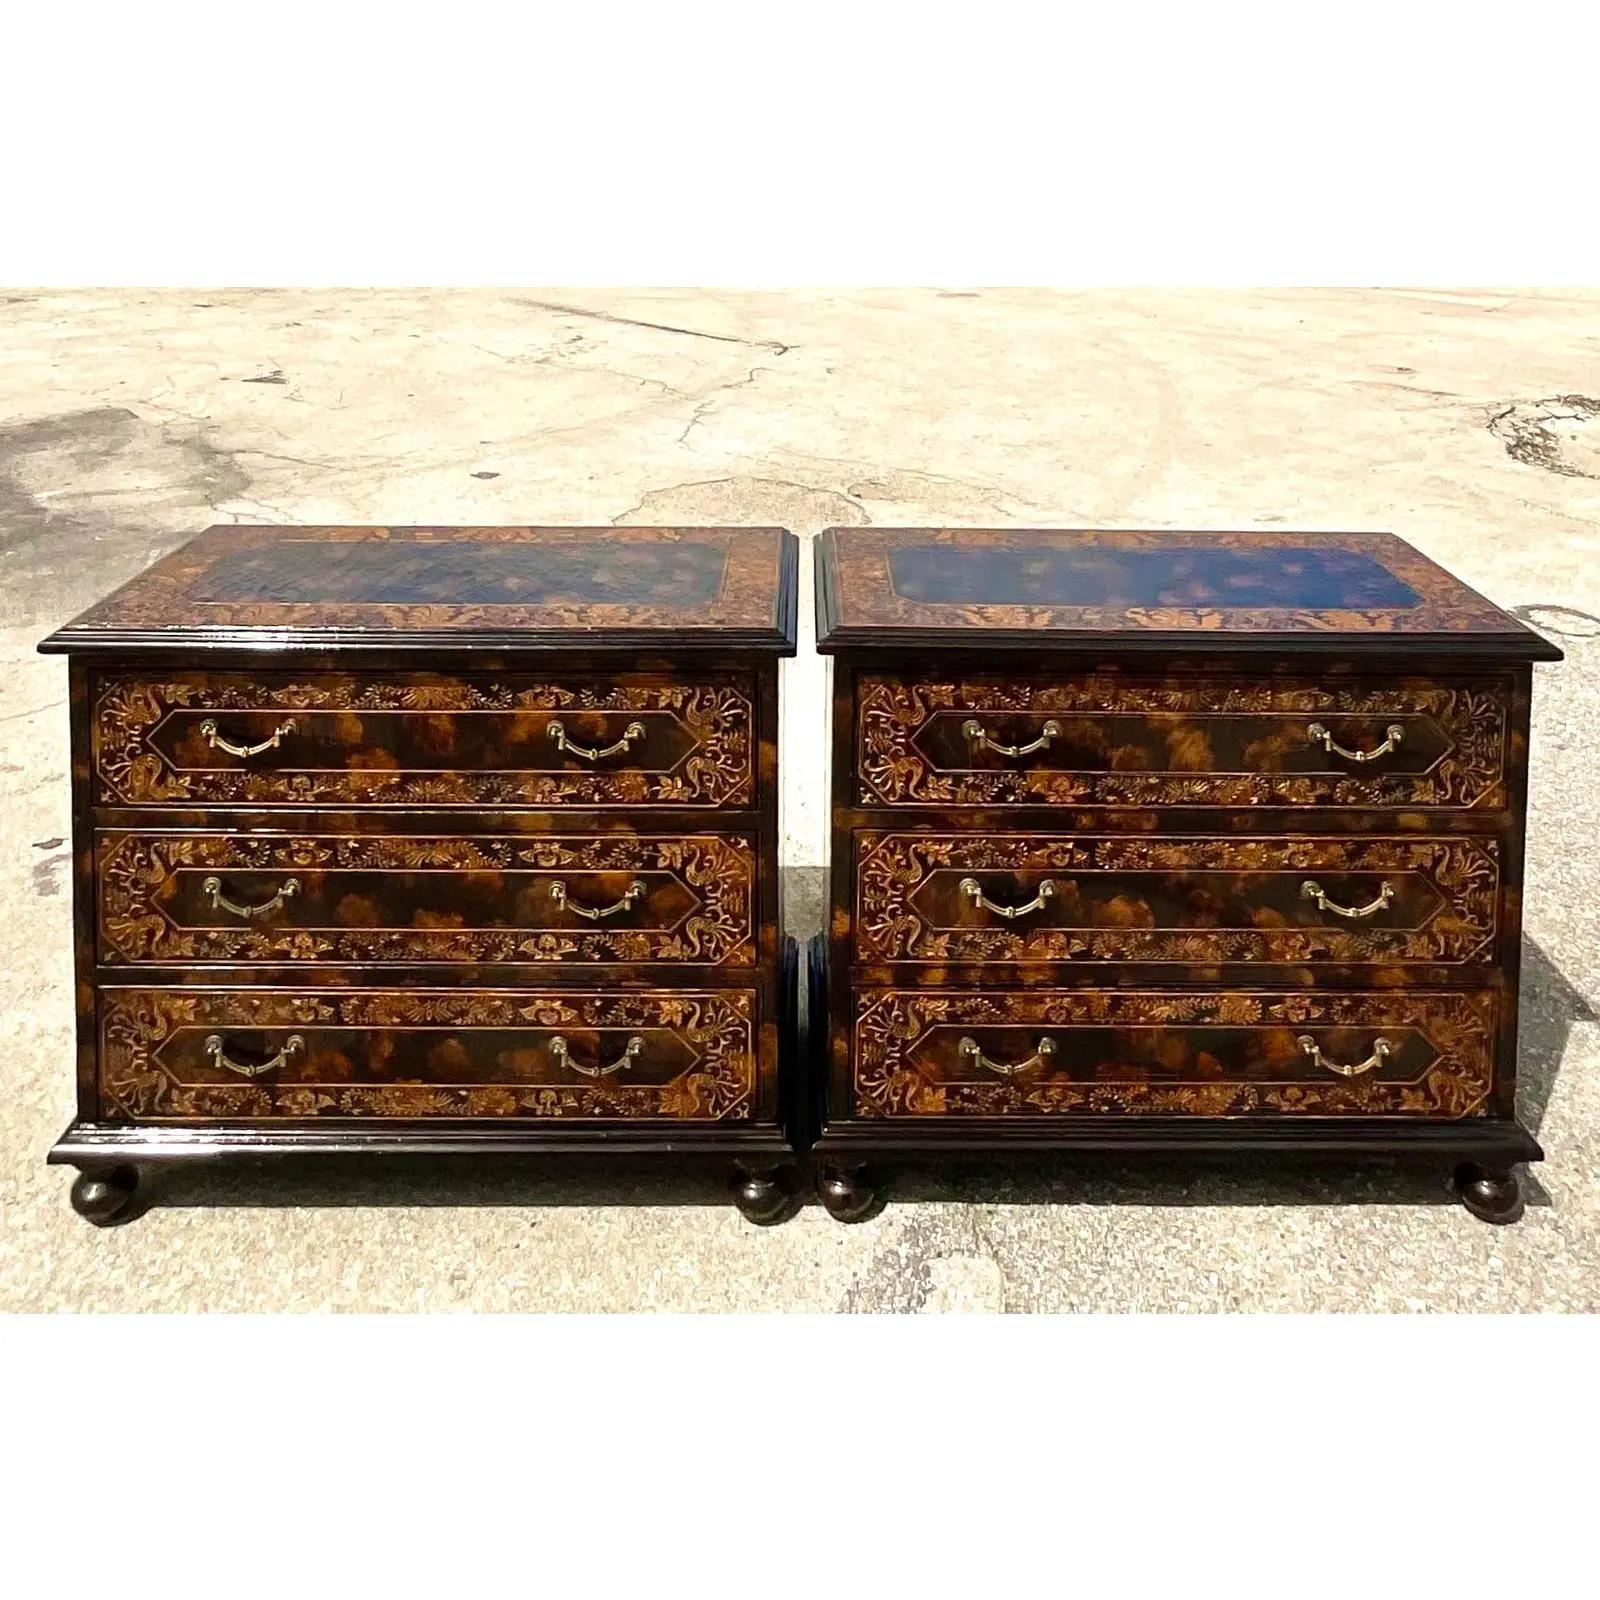 Tortoise Shell Vintage Regency Sarreid Carved Chest of Drawers, a Pair